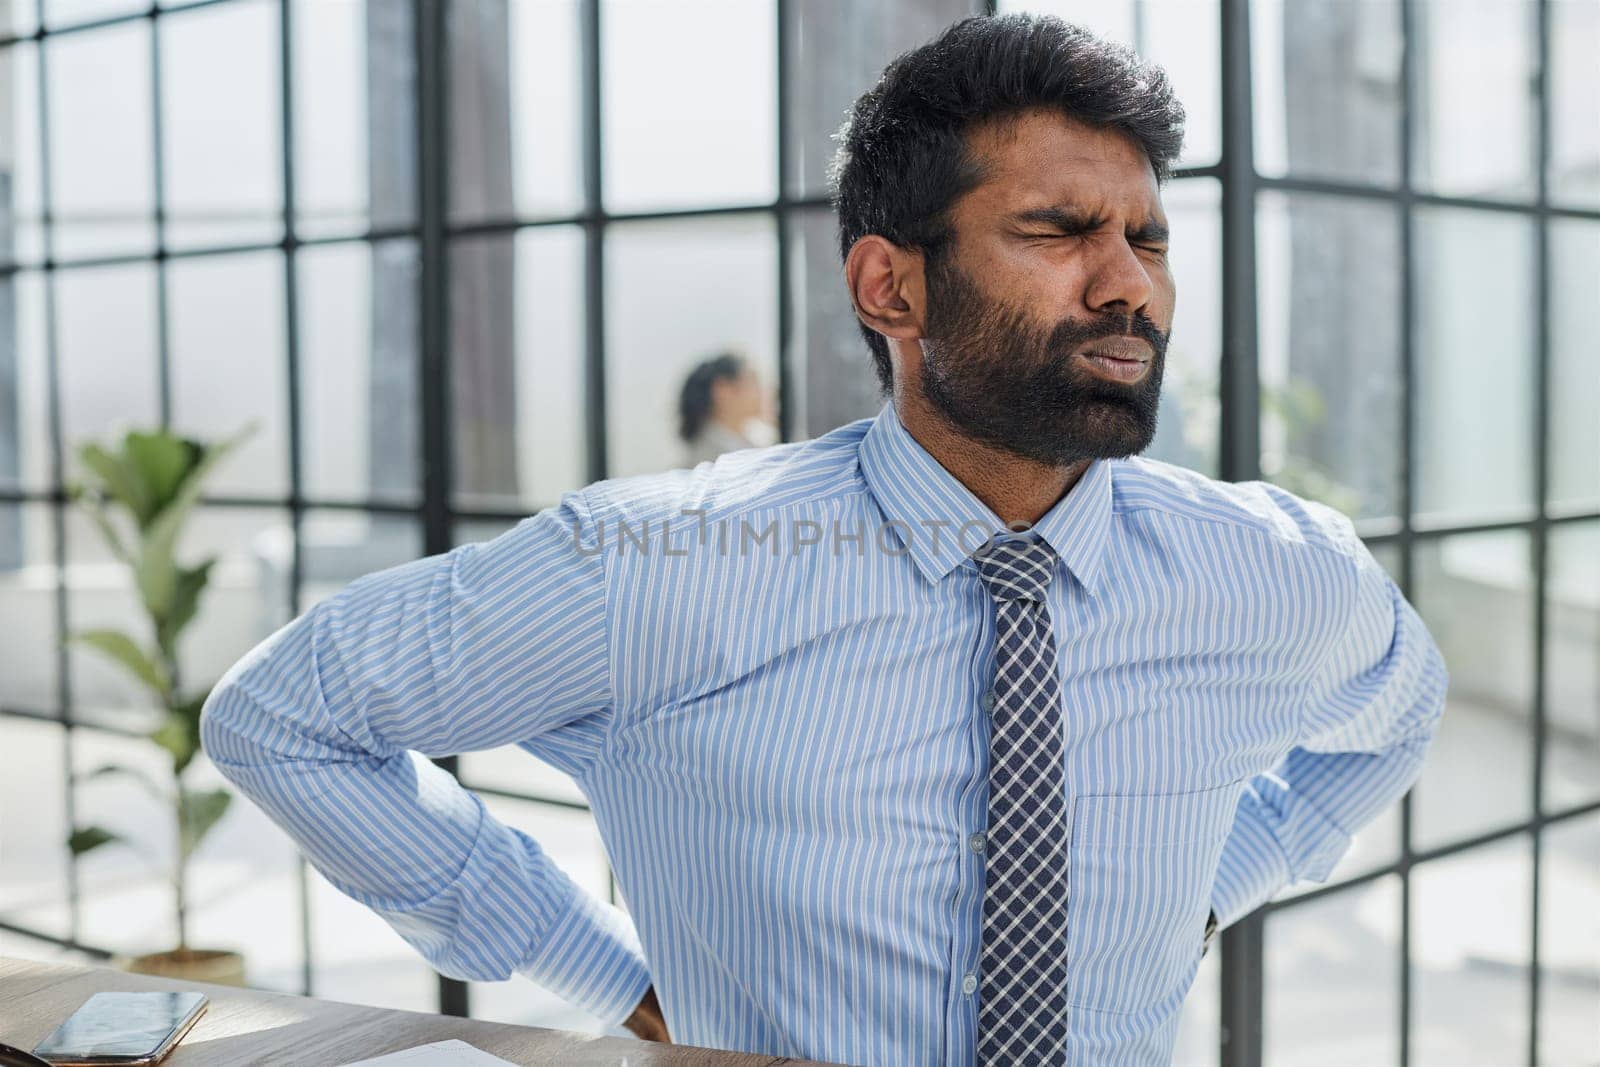 Guy Having Backache Massaging Aching Lower Back Suffering From Pain Sitting At Workplace In Modern Office